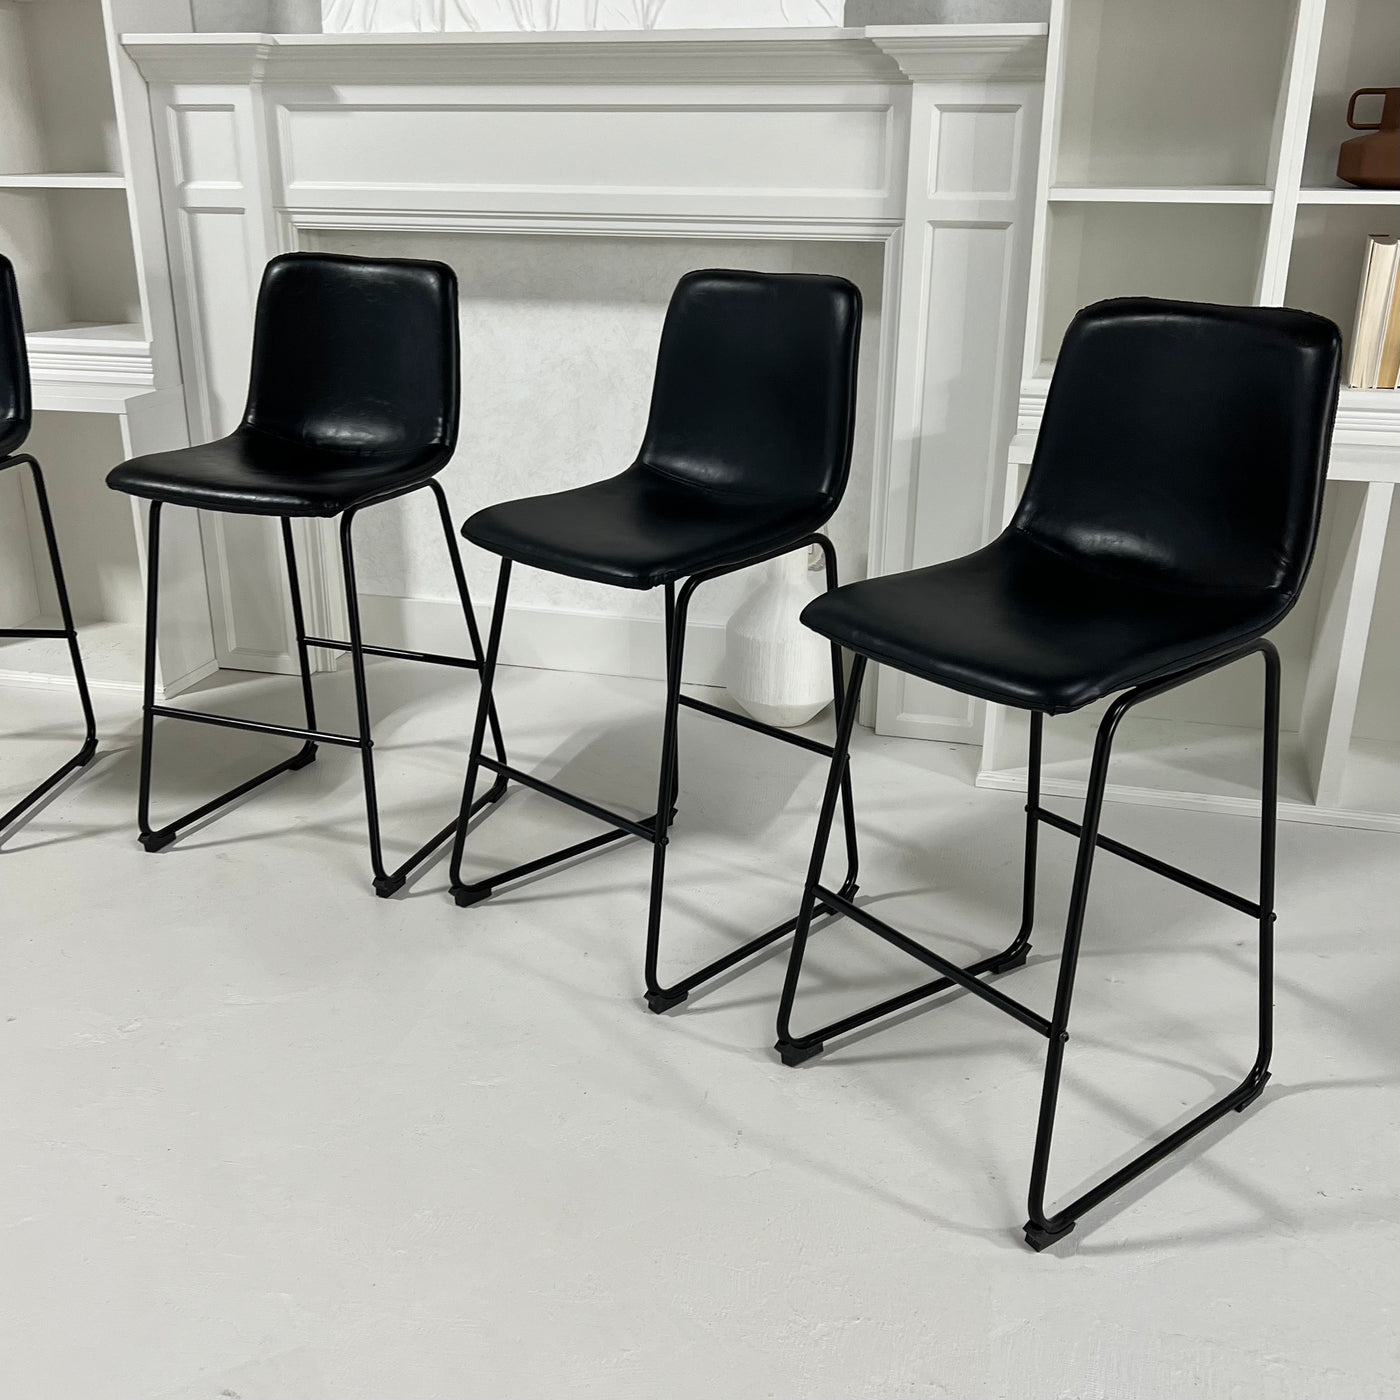 Alfred Black leather counter height stool